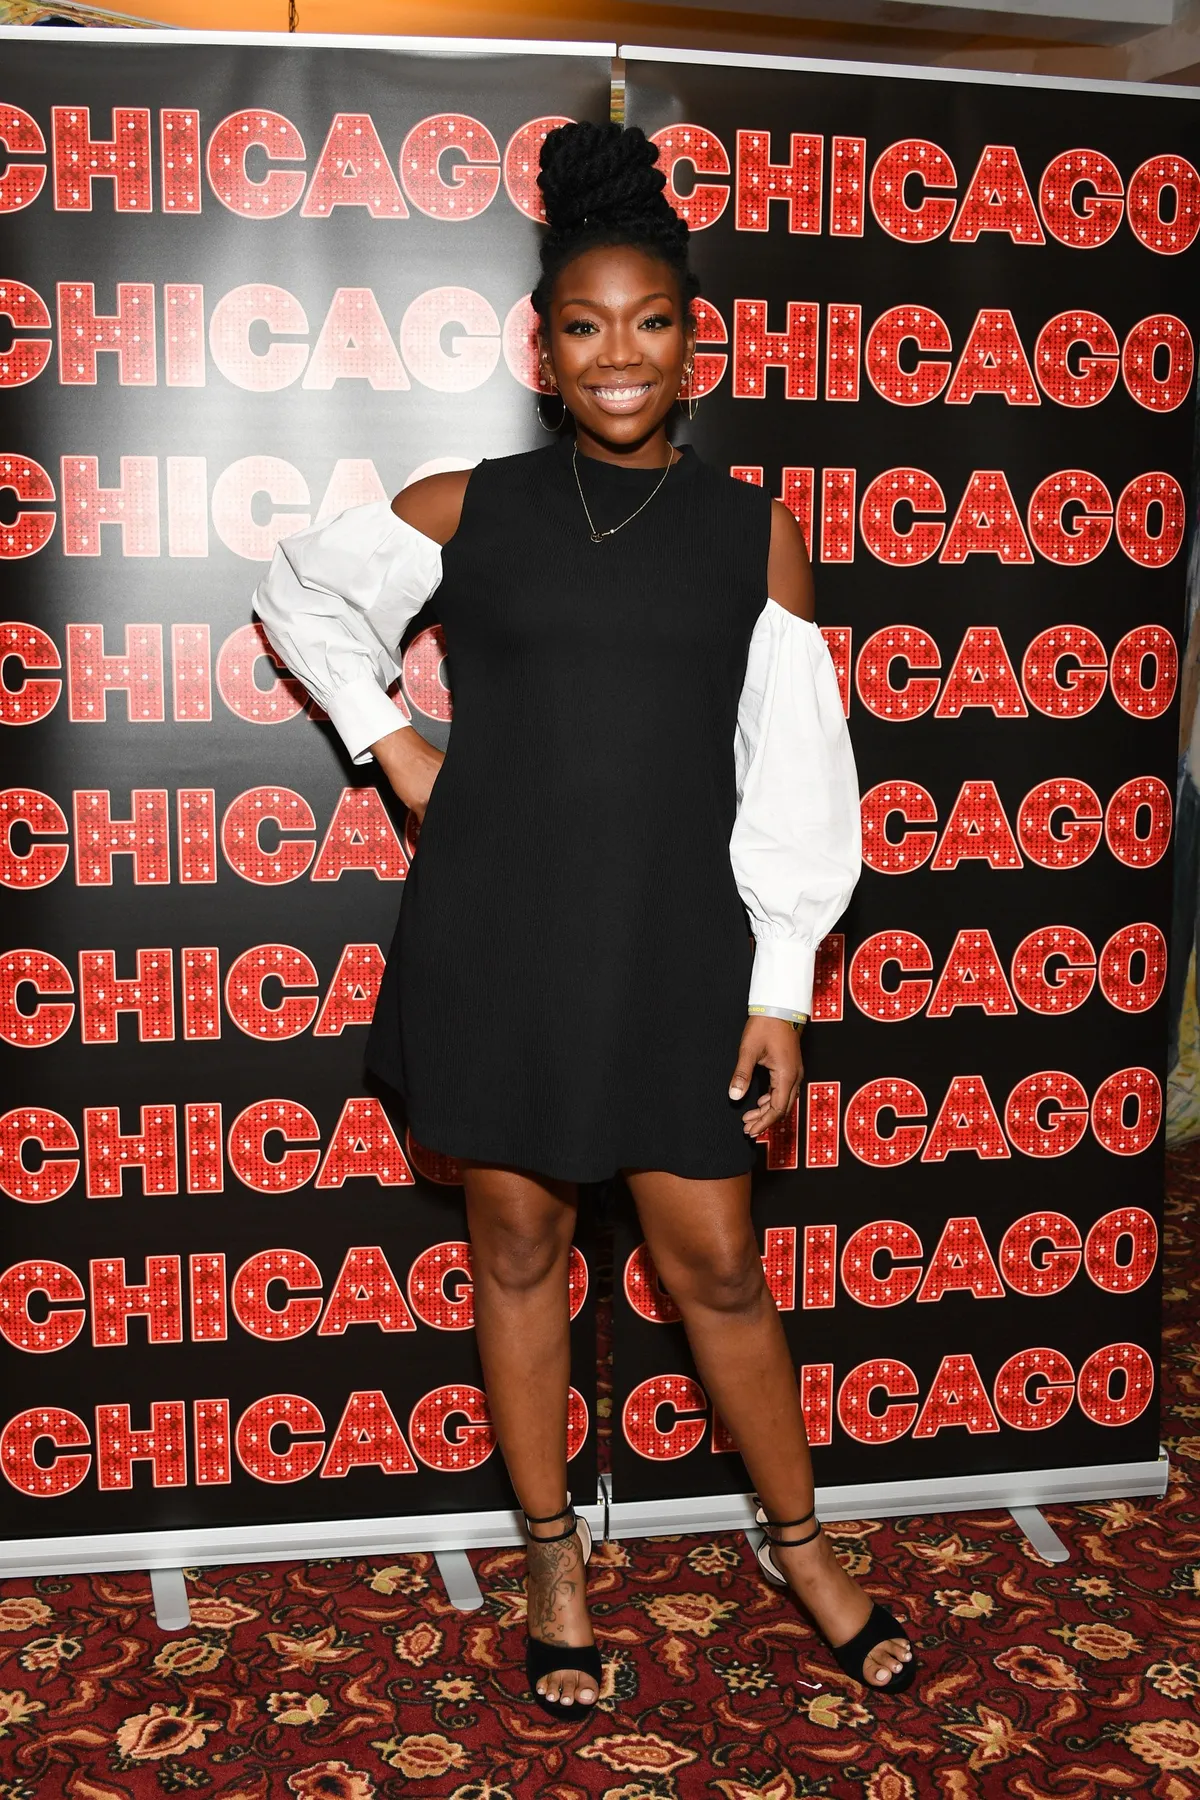 Brandy during a press event for the Broadway show "Chicago" in New York City on August 16, 2017.  | Photo: Getty Images